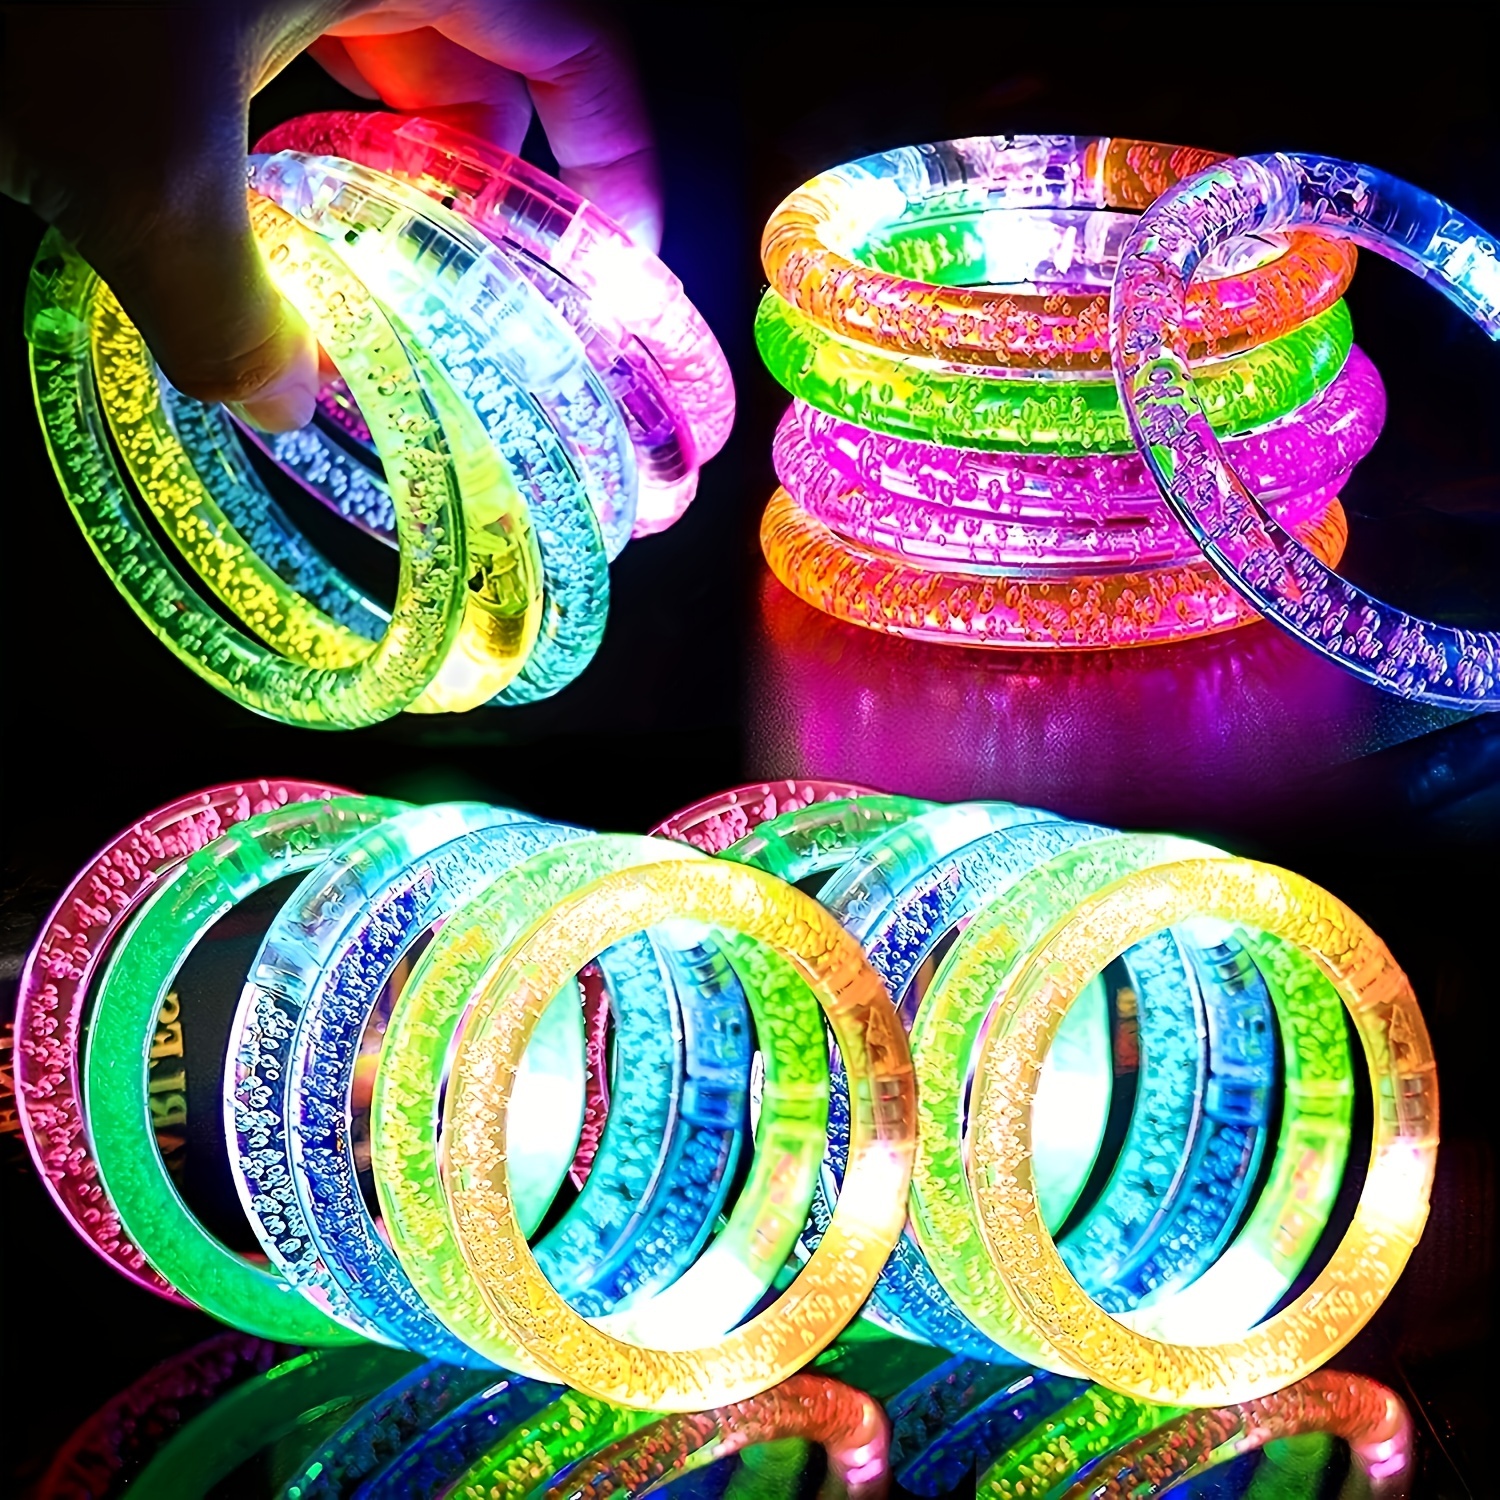 

6pcs/set Glow In The Dark Led Bracelets Christmas Halloween Party Supplies Favors Flashing Light Up Bracelet Glow Sticks Party Toys Party Accessory Carnival Party Game Gifts (random Color) Easter Gift